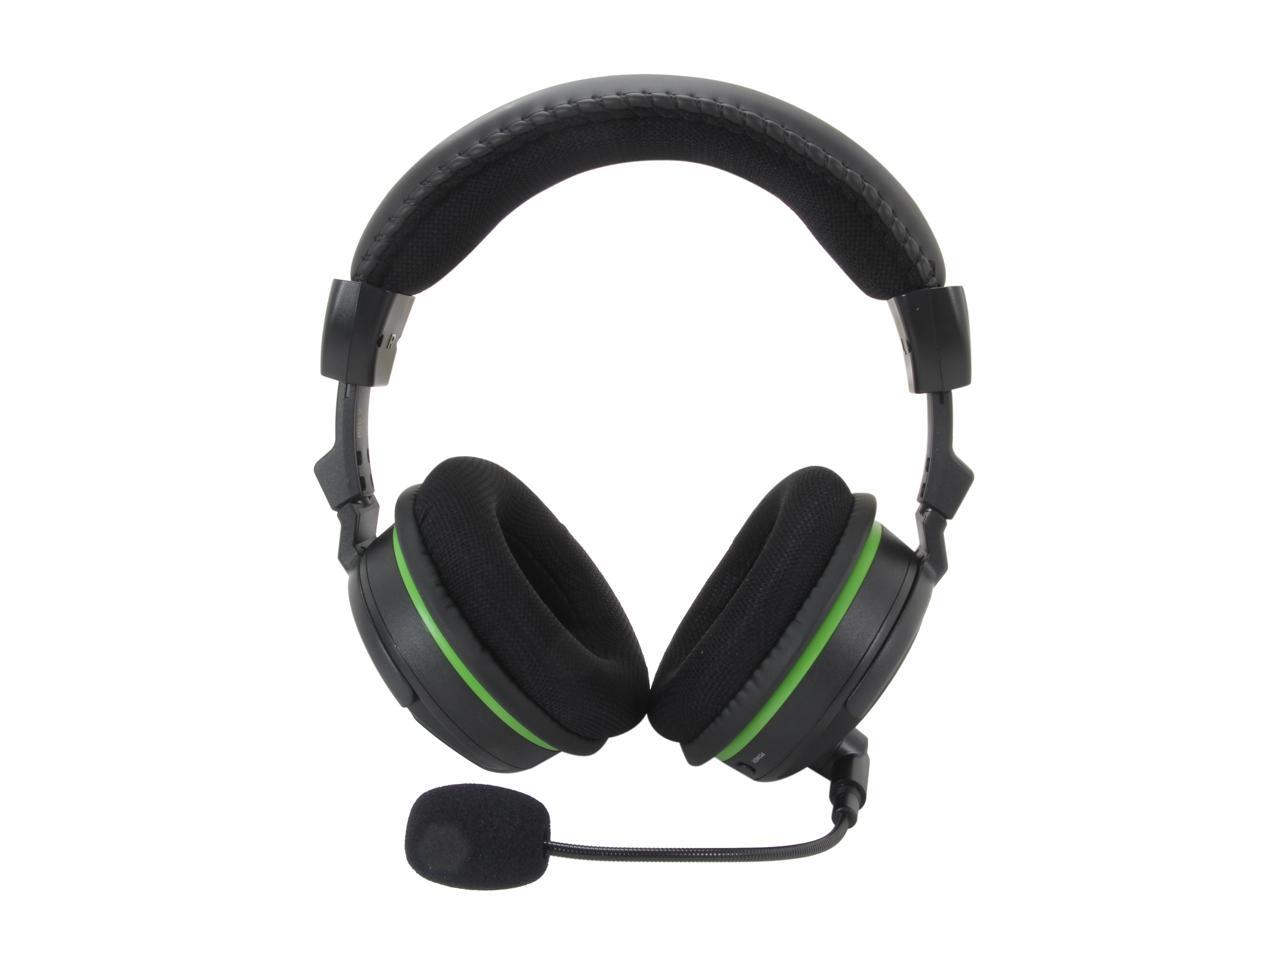 Turtle Beach Ear Force X42 Premium Wireless Gaming Headset With Dolby